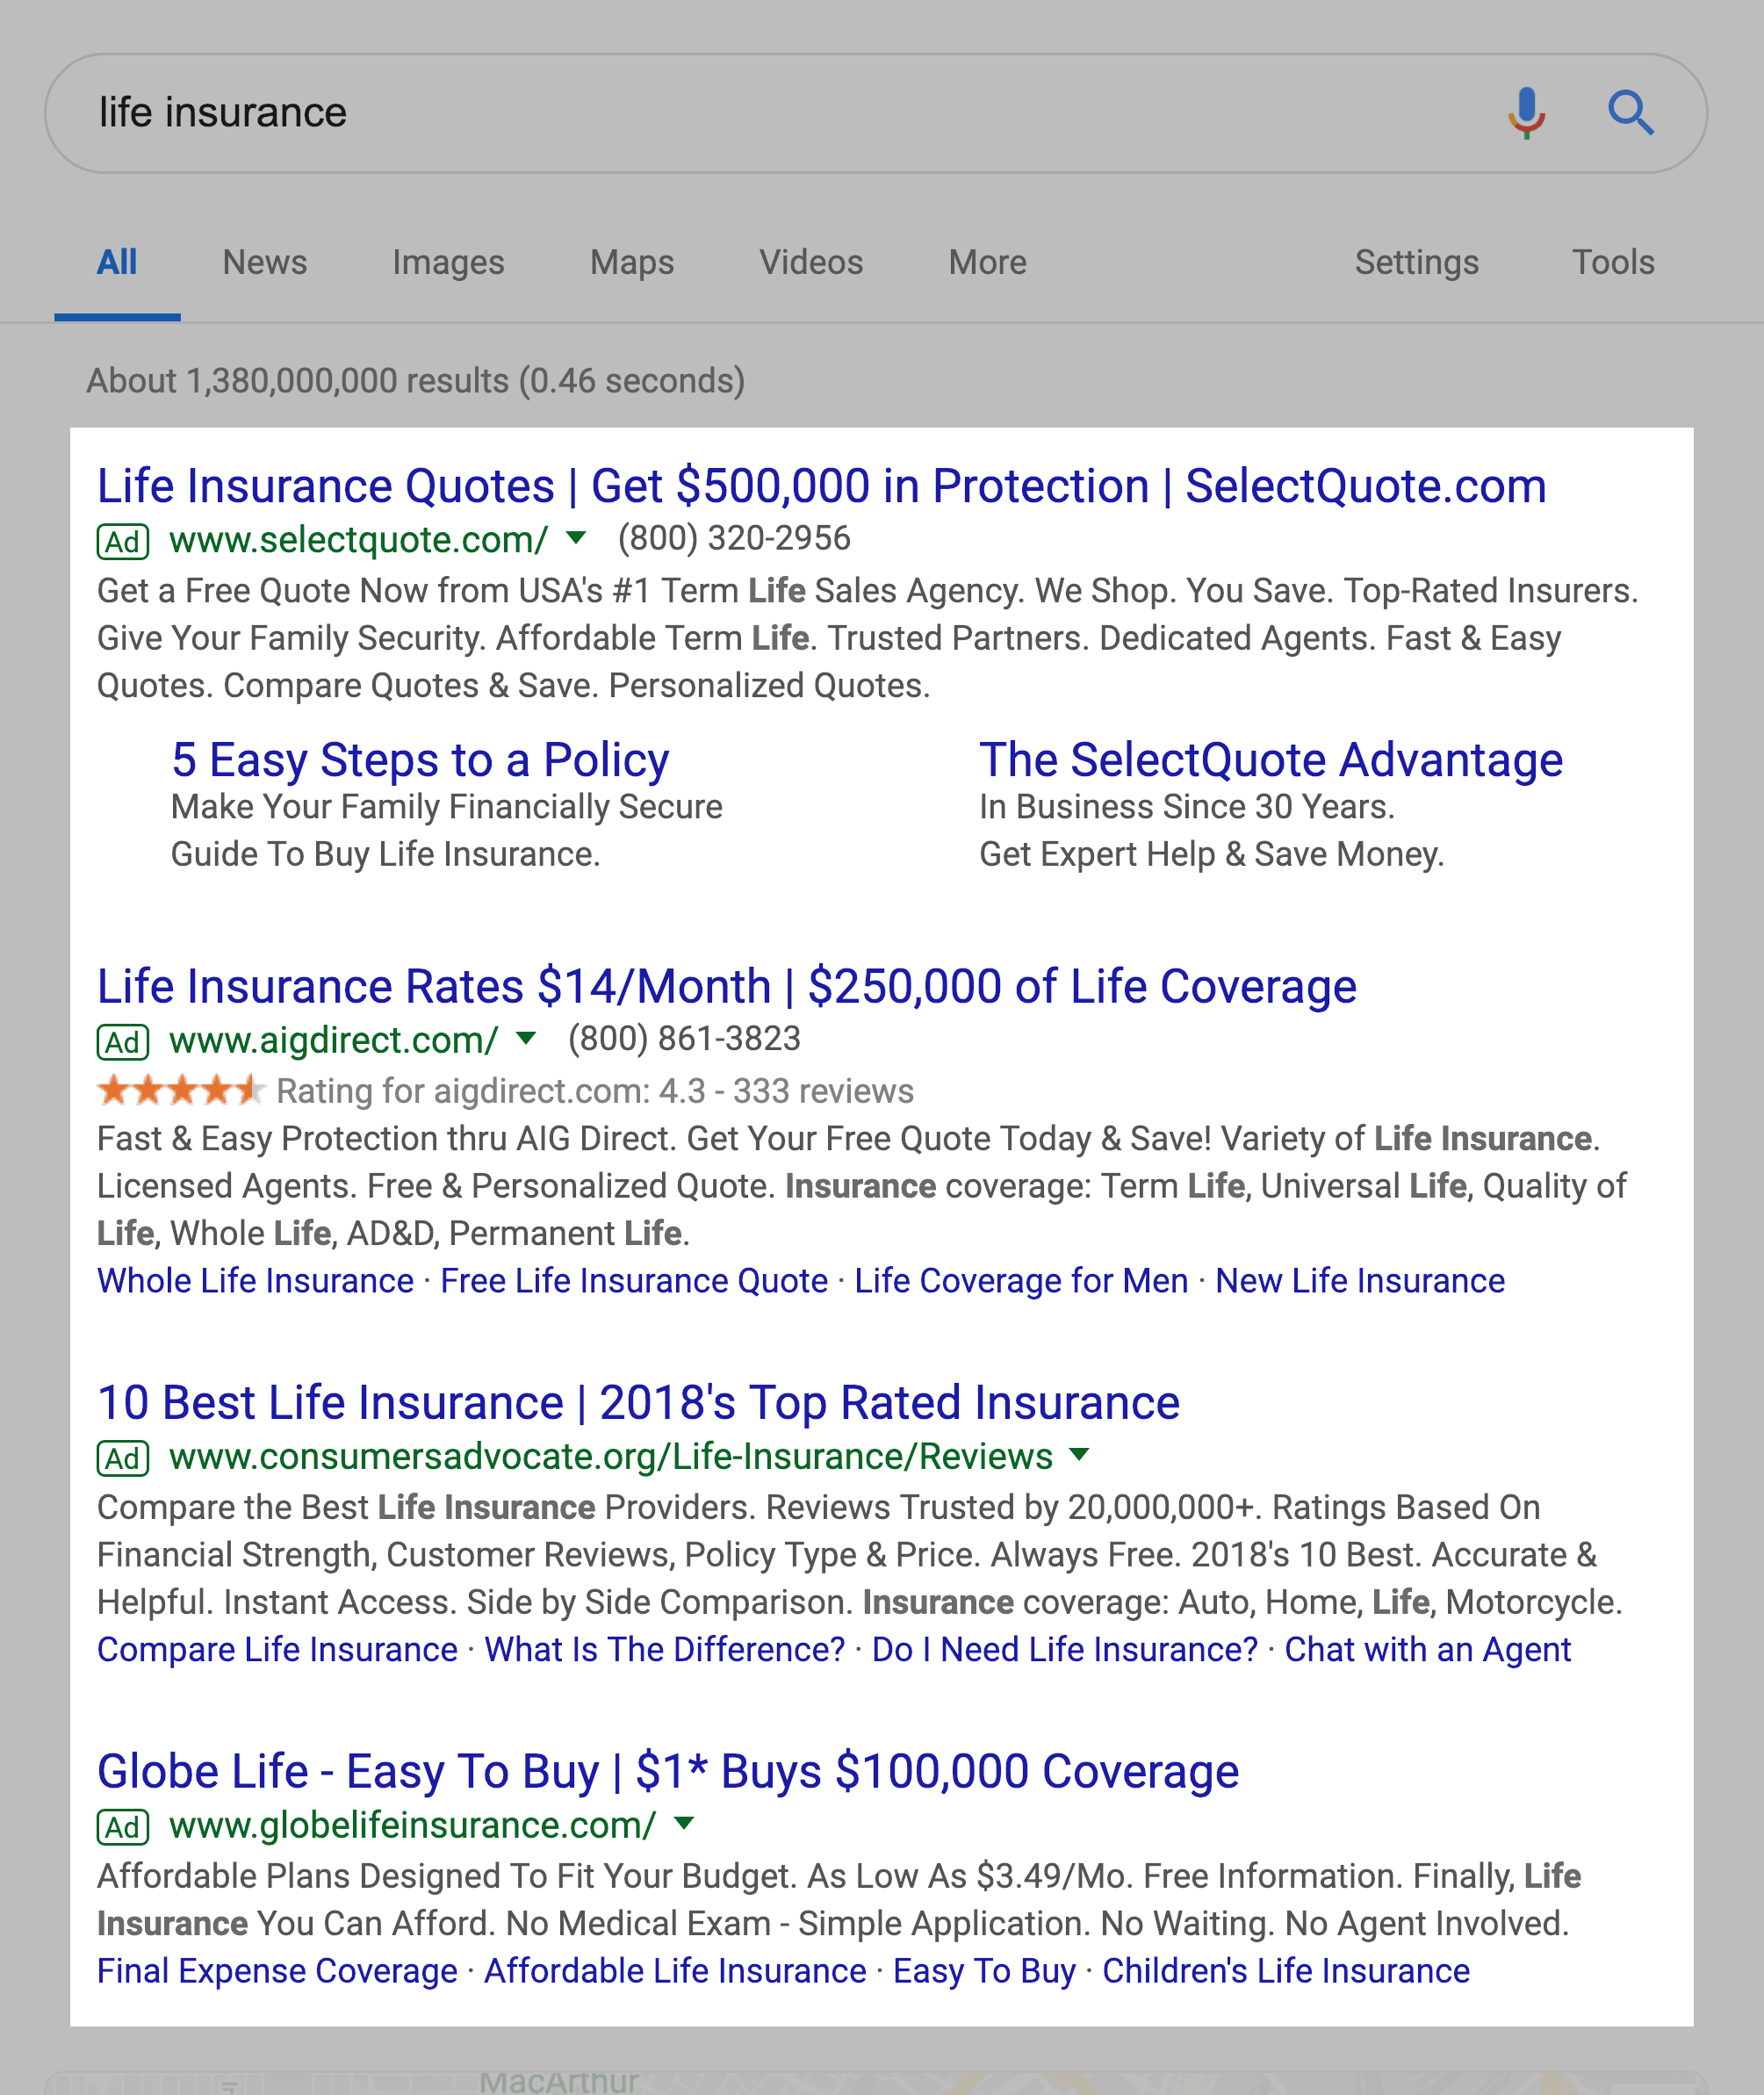 "life insurance" SERPs – Ads above the fold